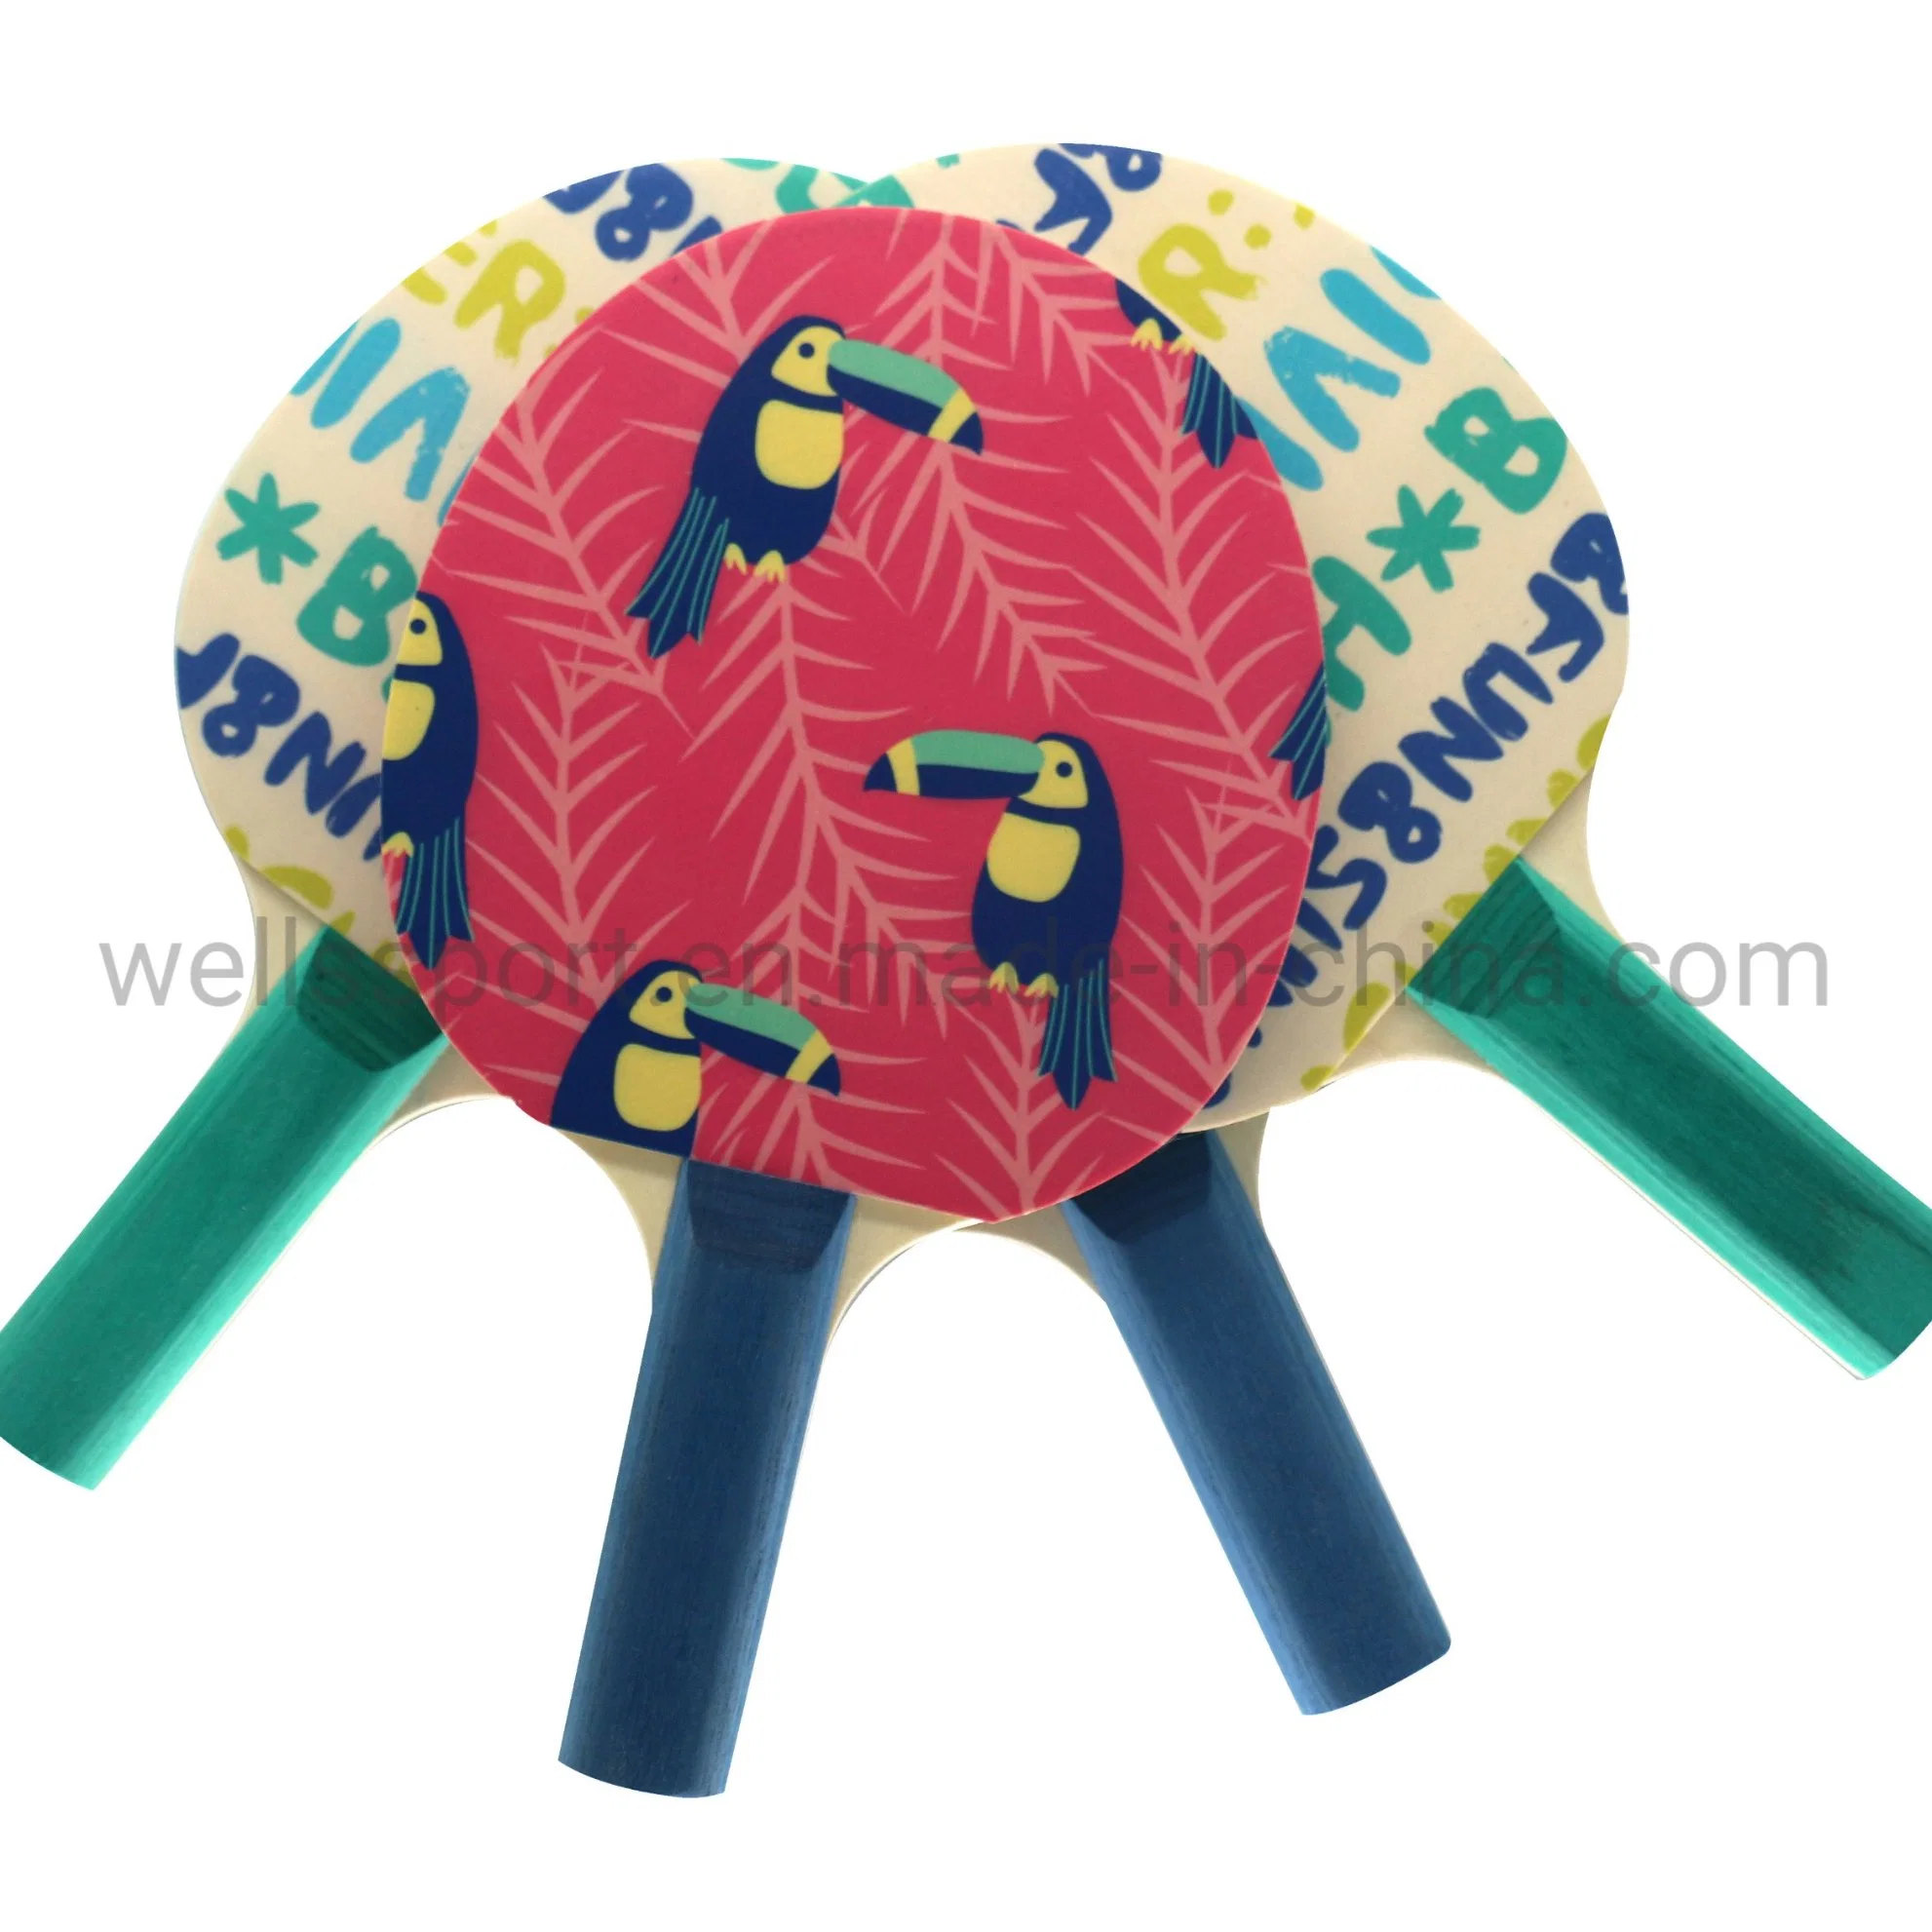 FSC Customized Design Printing Rubber Table Tennis Racket Colorful Ping Pong Bat Paddle